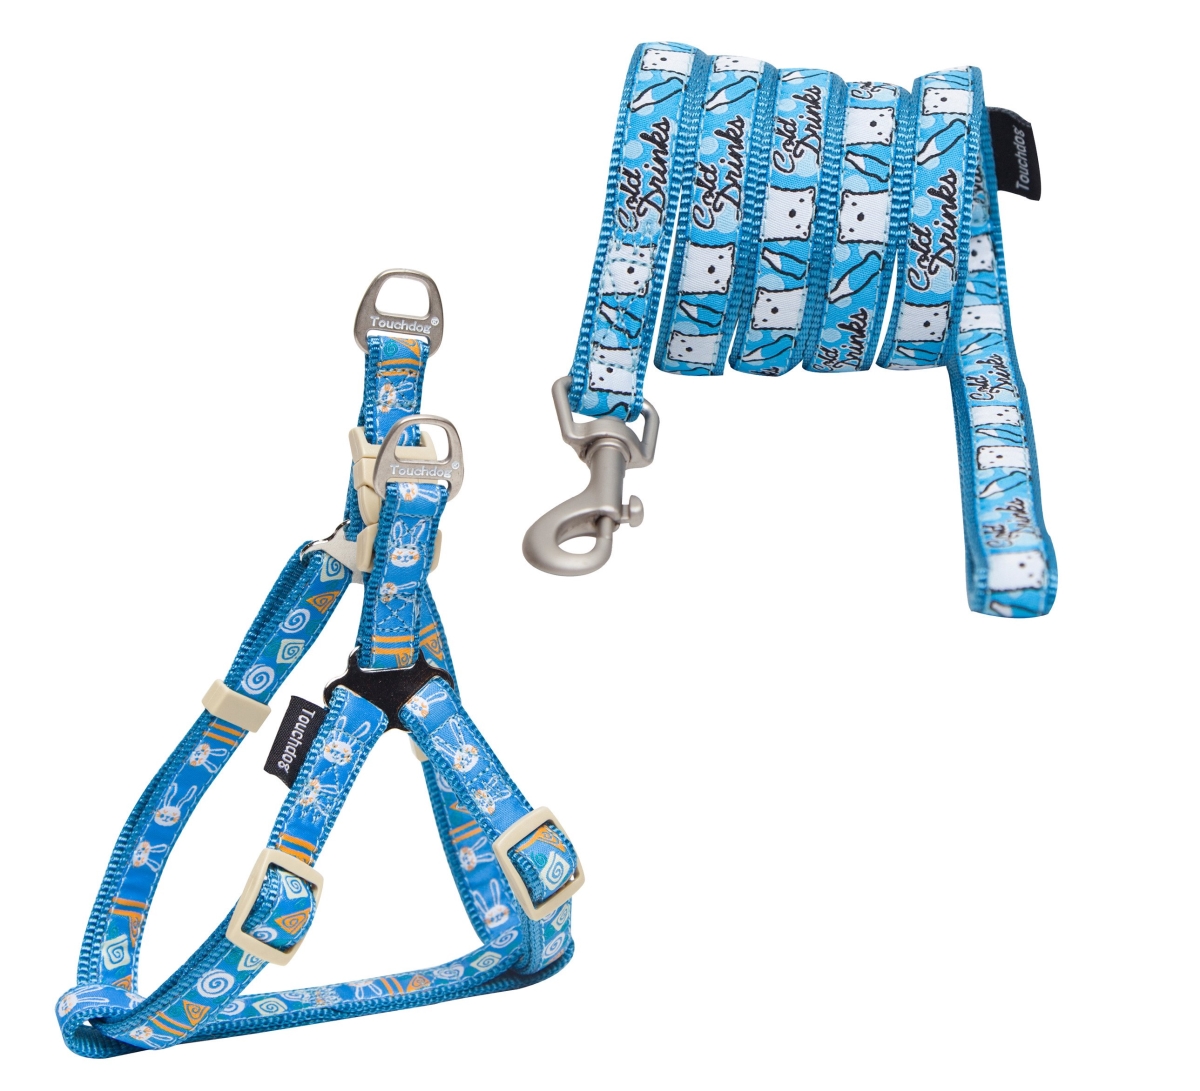 Picture of Touchdog HA7BLSM Caliber Designer Embroidered Fashion Pet Dog Leash & Collar Combination, Blue Pattern - Small